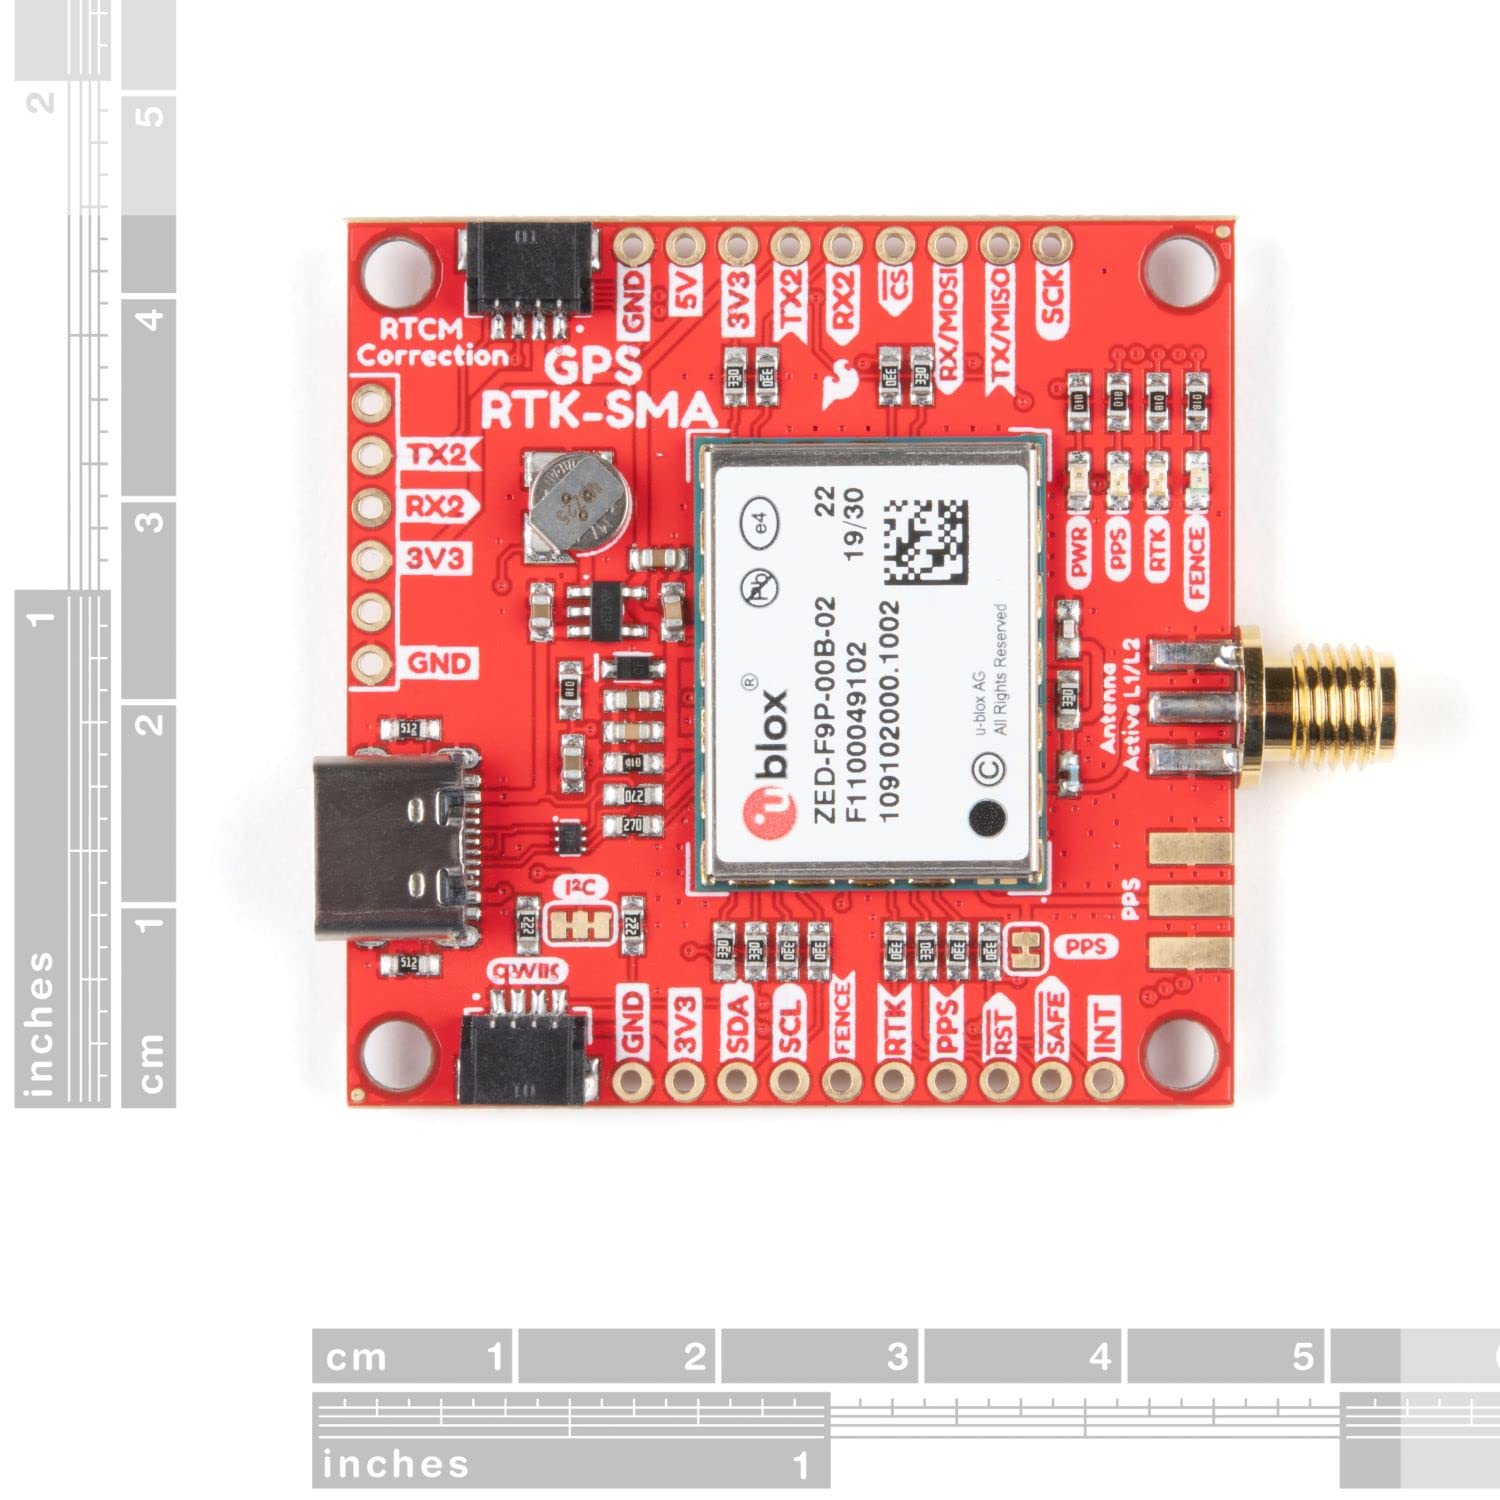 SparkFun GPS-RTK-SMA Breakout-ZED-F9P (Qwiic)-Concurrent reception of GPS GLONASS Galileo BeiDou High precision GPS 10mm 3 dimensional accuracy Receives L1C/A & L2C bands Voltage:5V or 3.3V Logic:3.3V